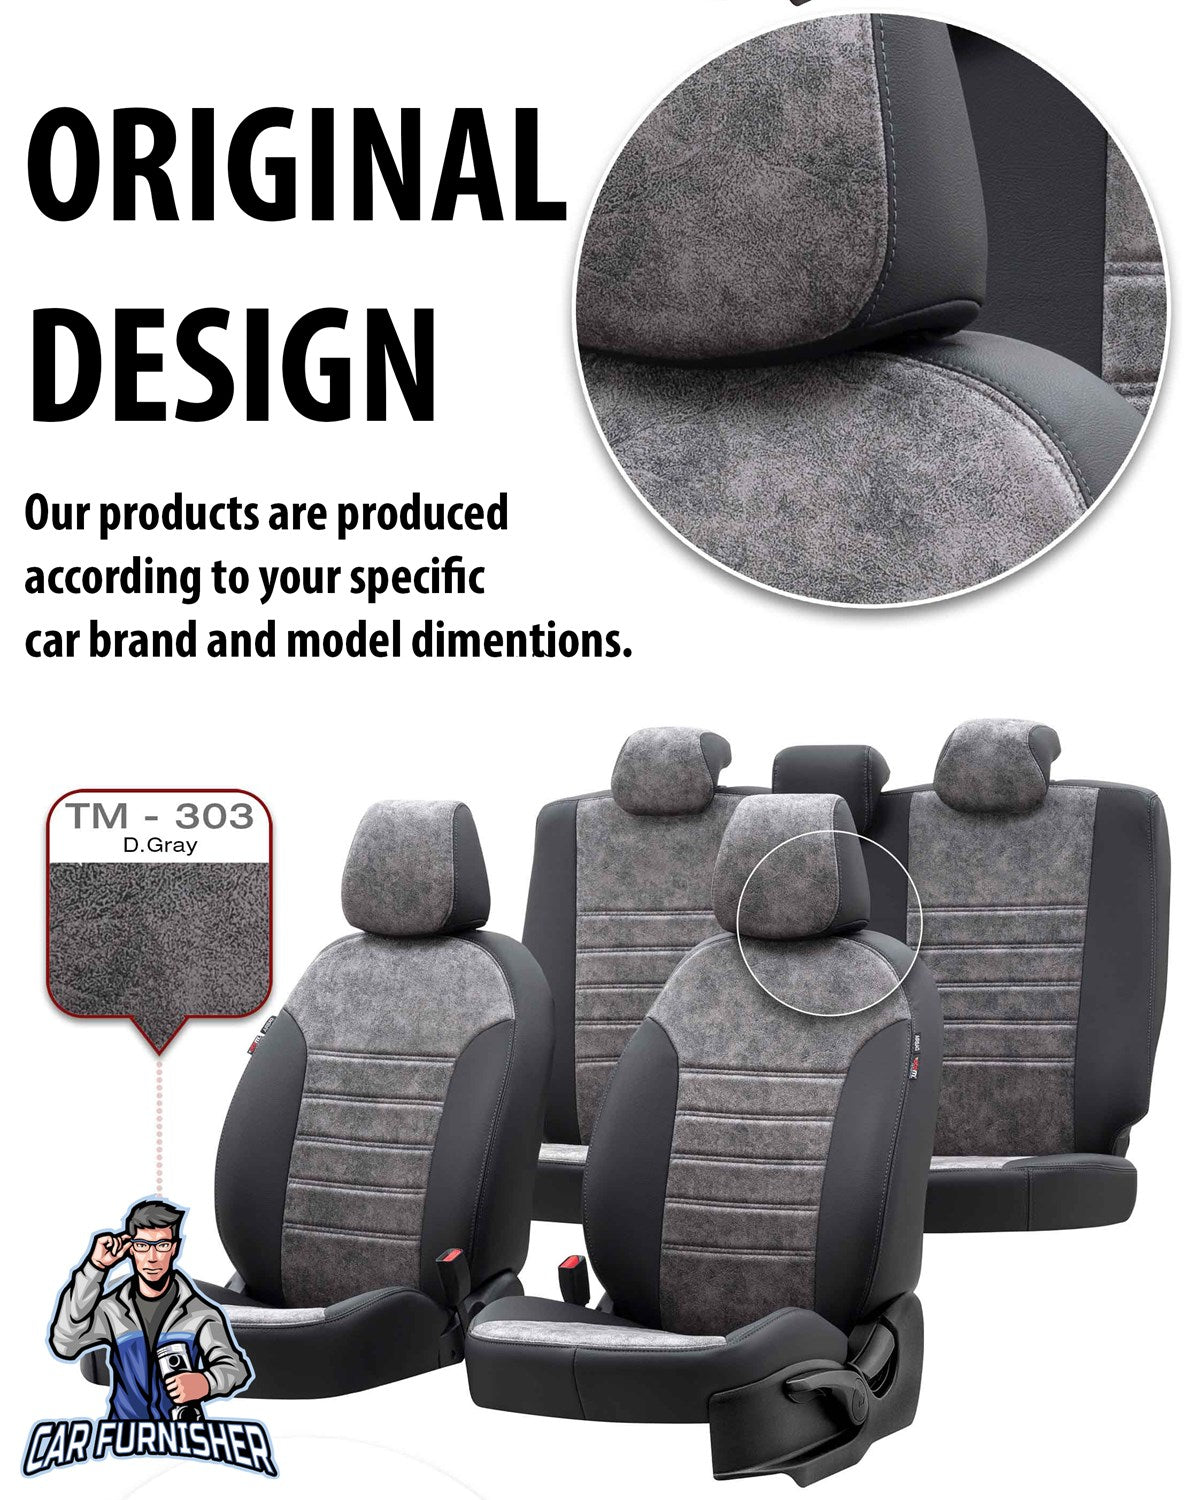 Volkswagen Touareg Seat Cover Milano Suede Design Ivory Leather & Suede Fabric